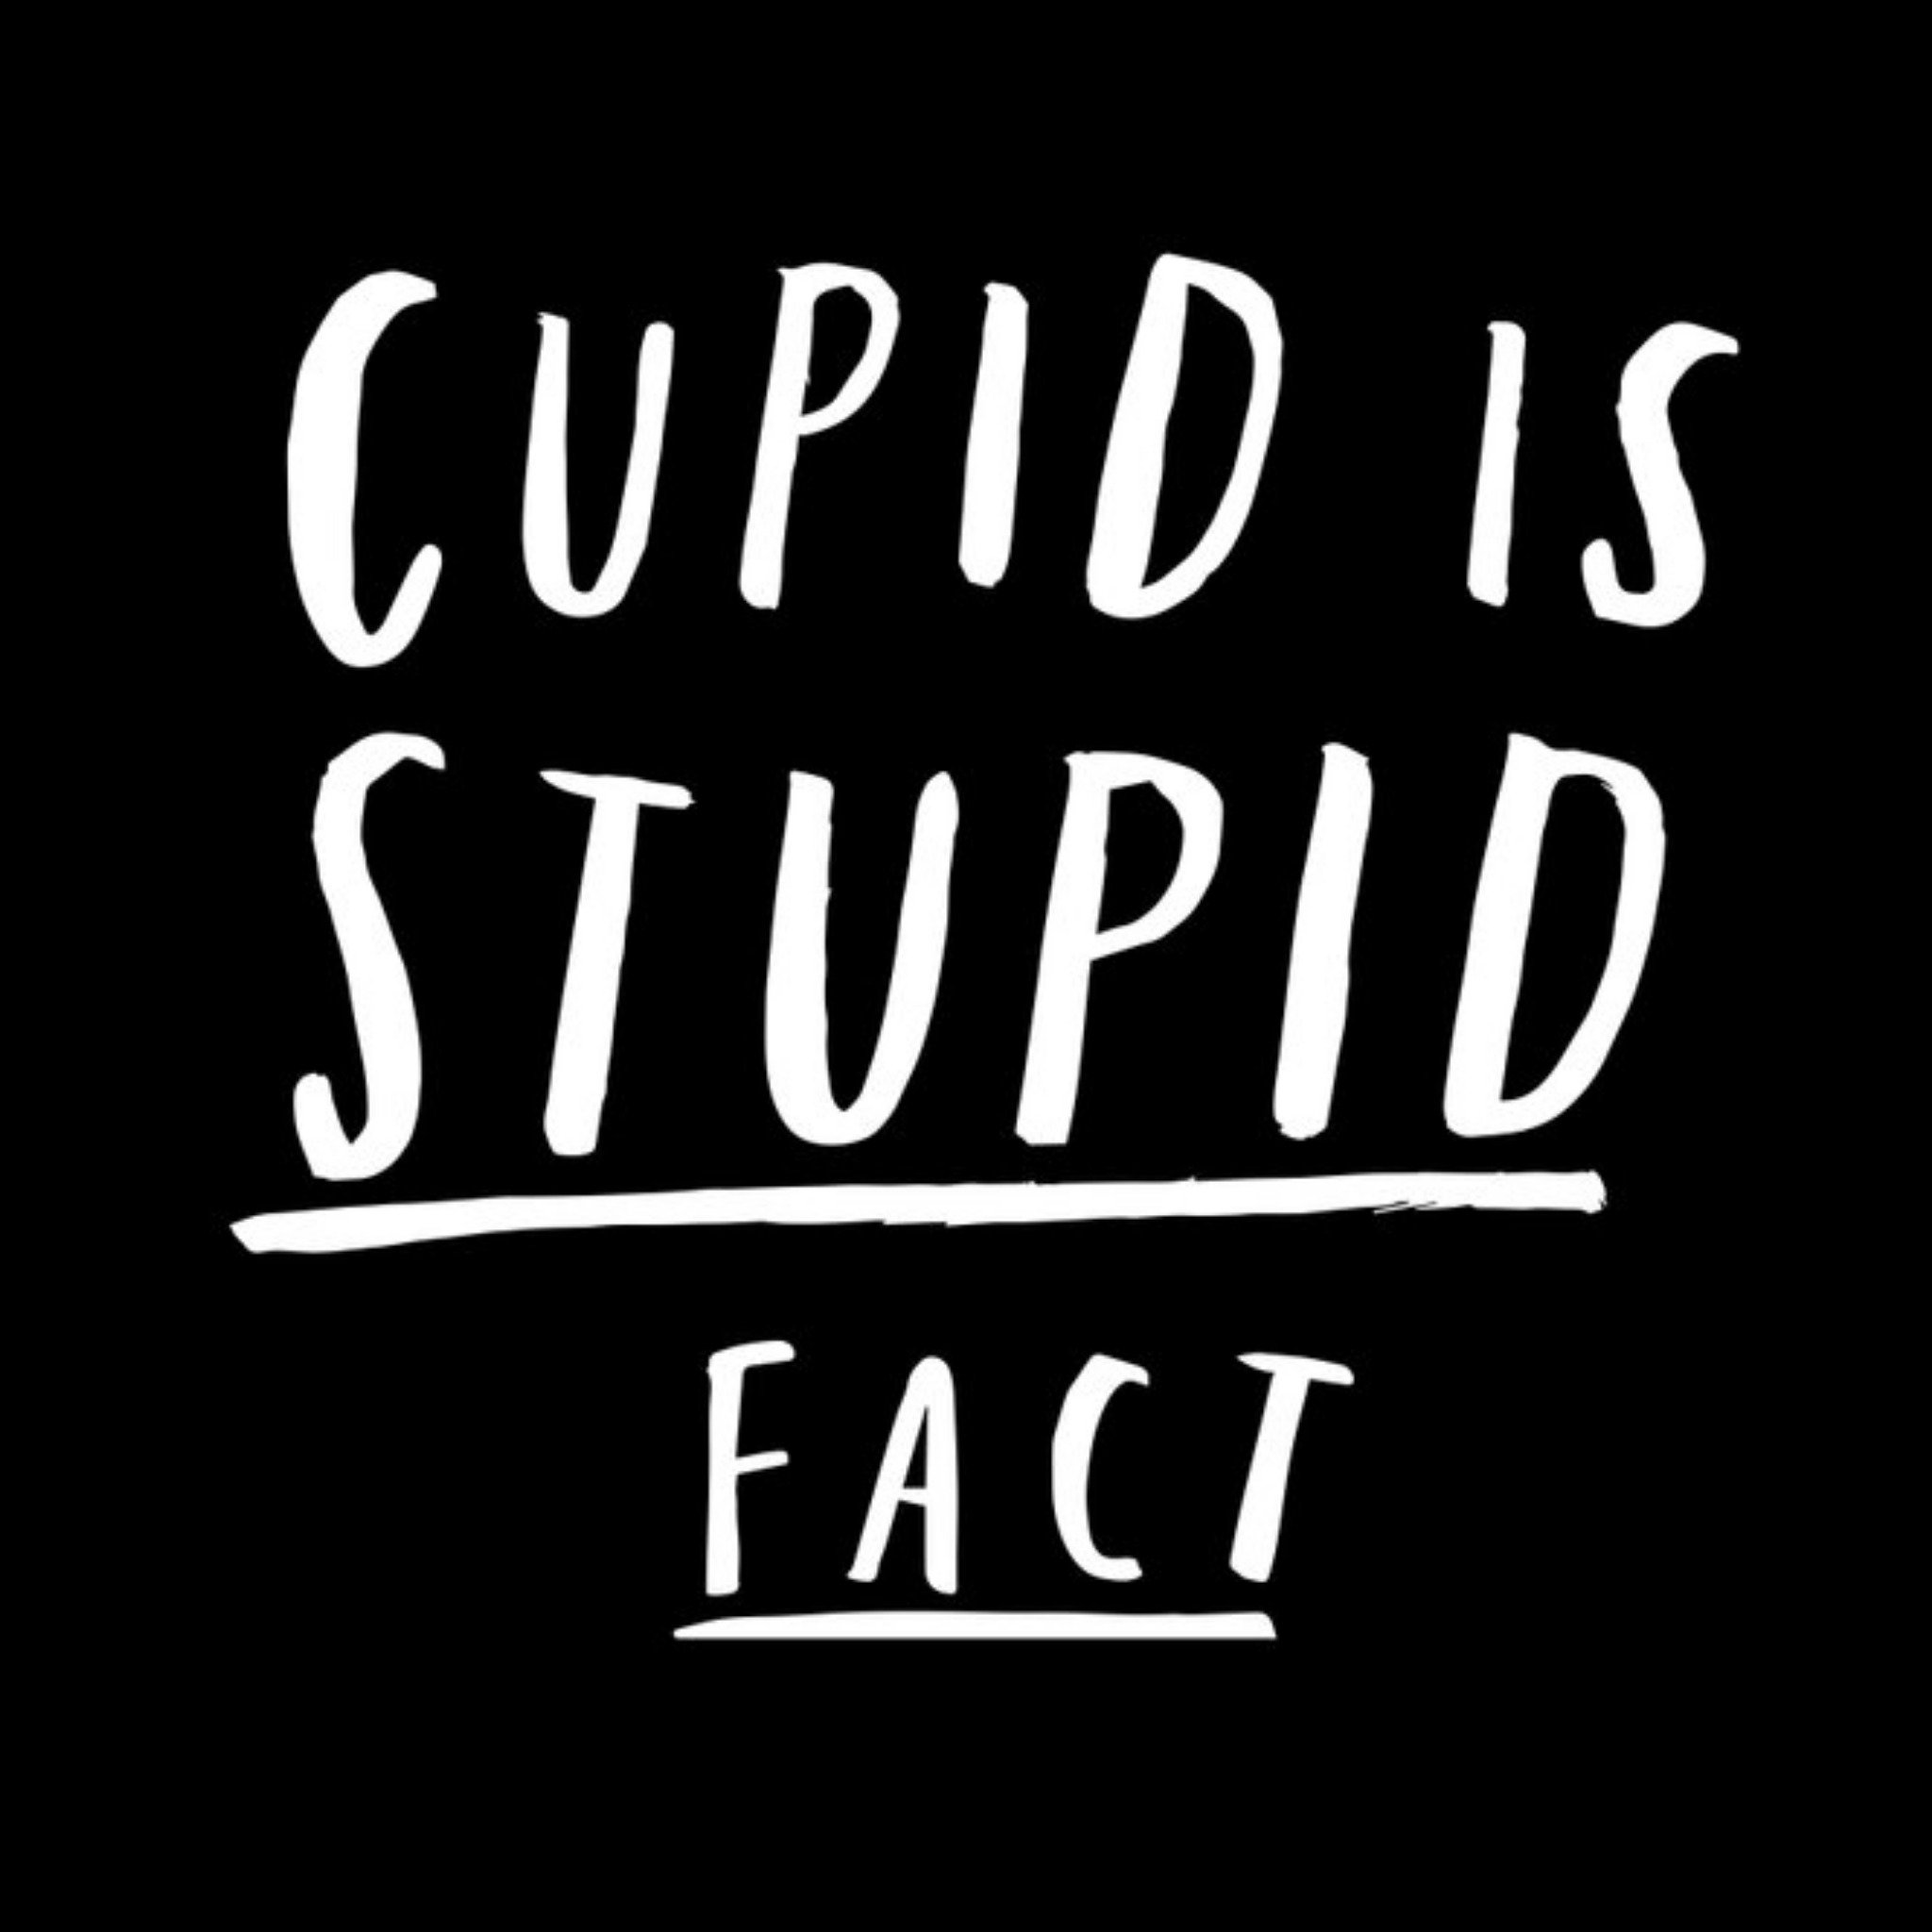 Moonpig Cupid Is Stupid Fact Square Card, Large